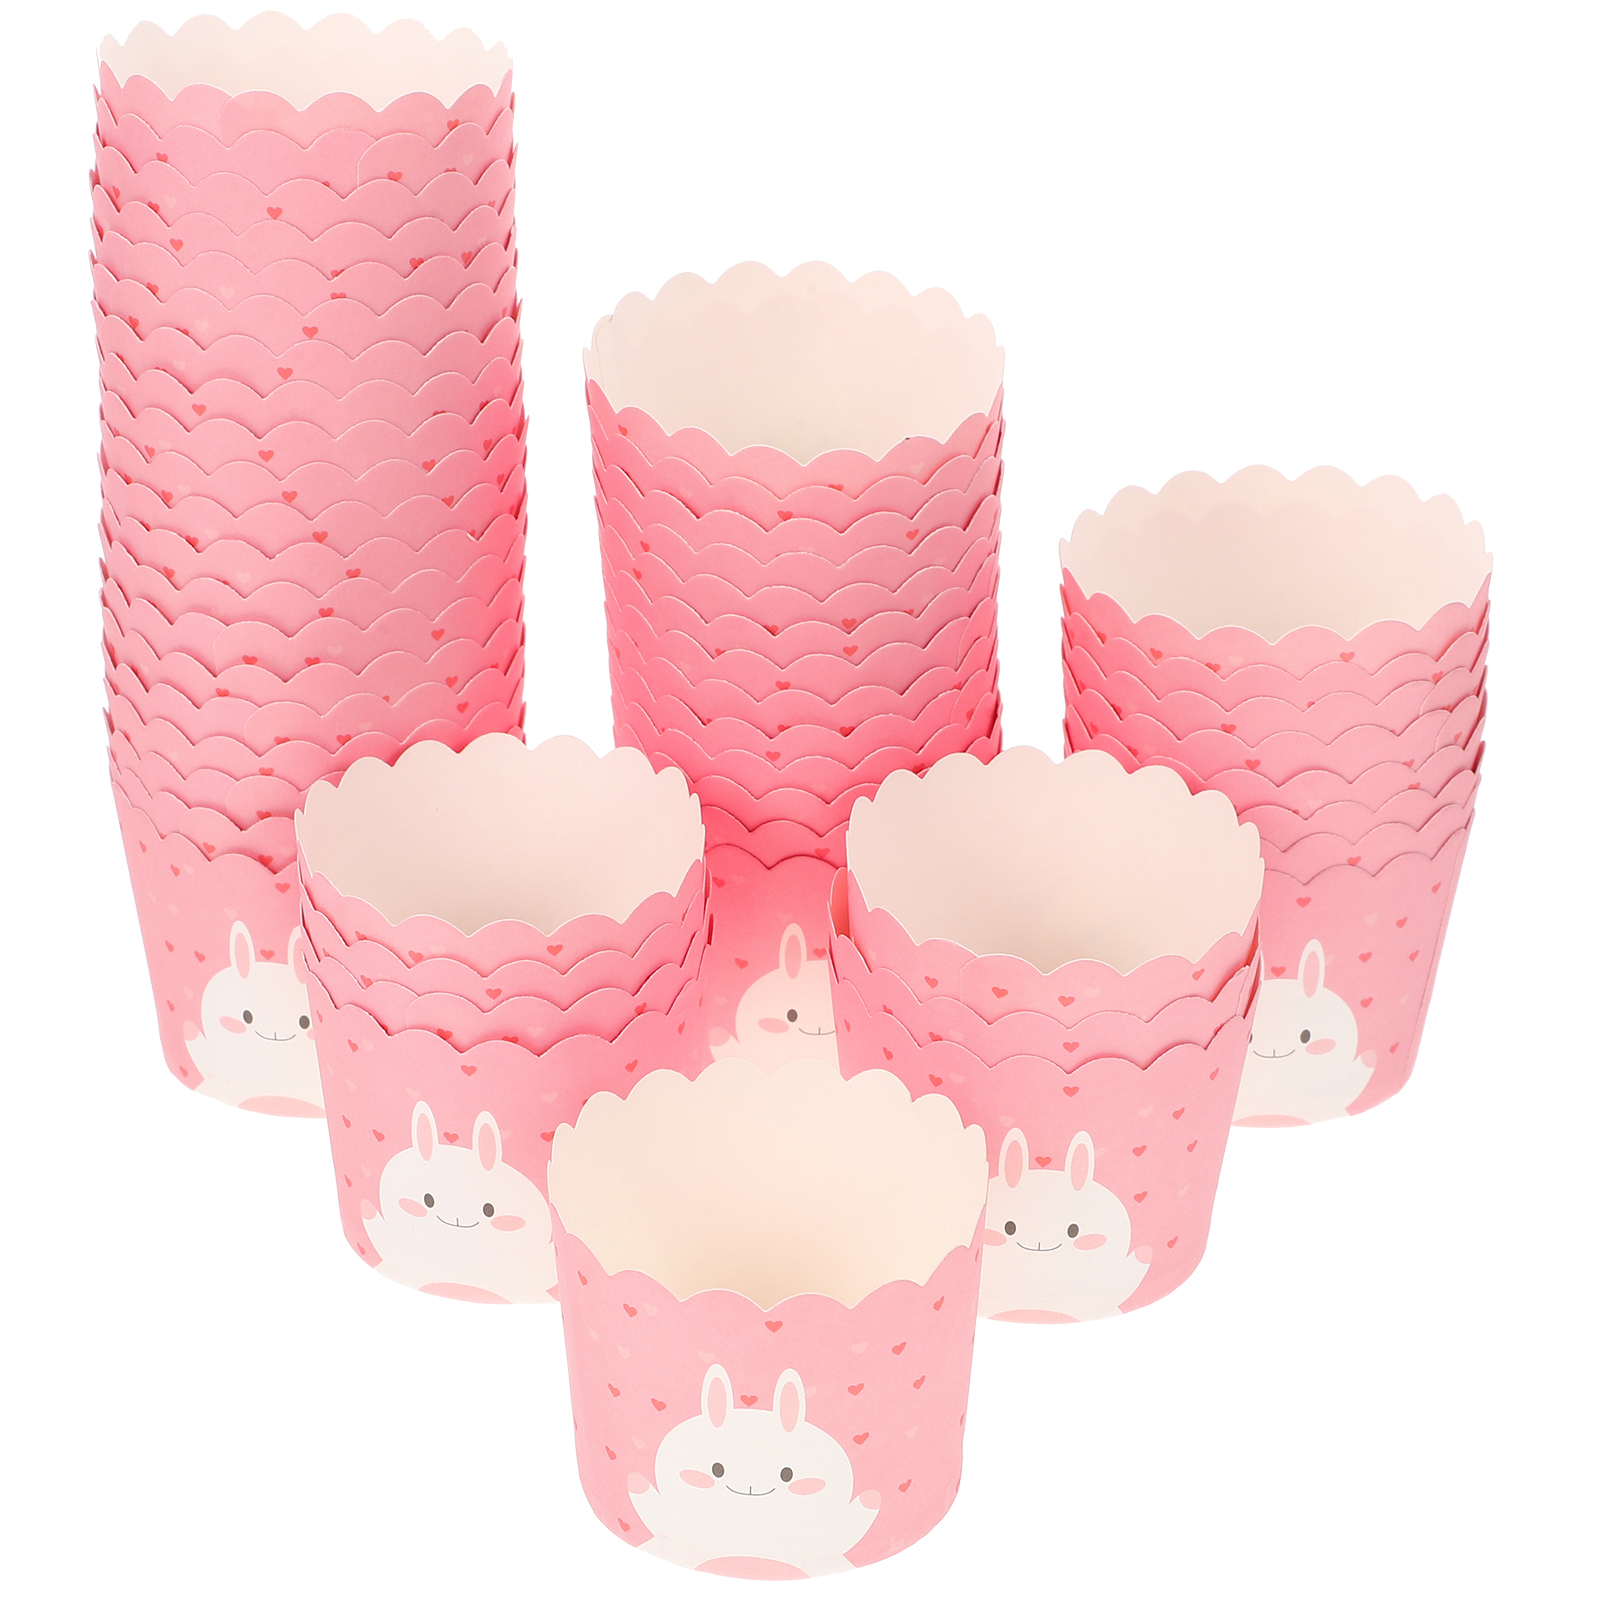 100 Pcs Cake Cups Cupcake Wrappers Party Liners Supplies Paper Packing ...